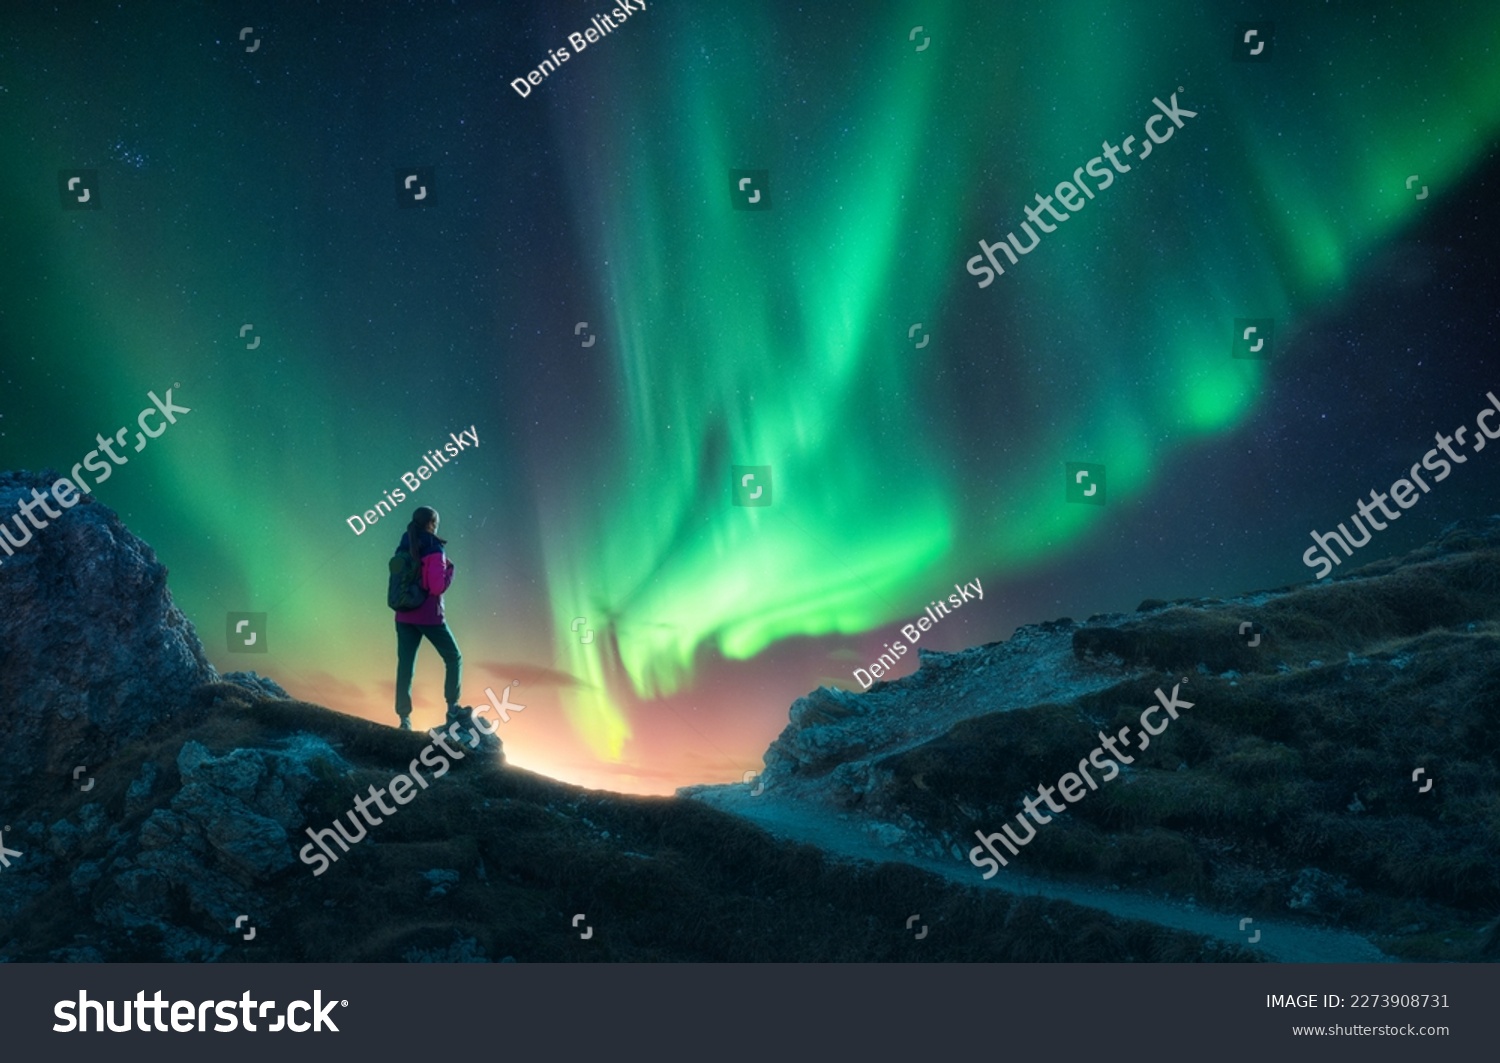 Northern lights and young woman on mountain peak at night. Aurora borealis and silhouette of alone girl on mountain trail. Landscape with polar lights. Starry sky with bright aurora. Travel background #2273908731